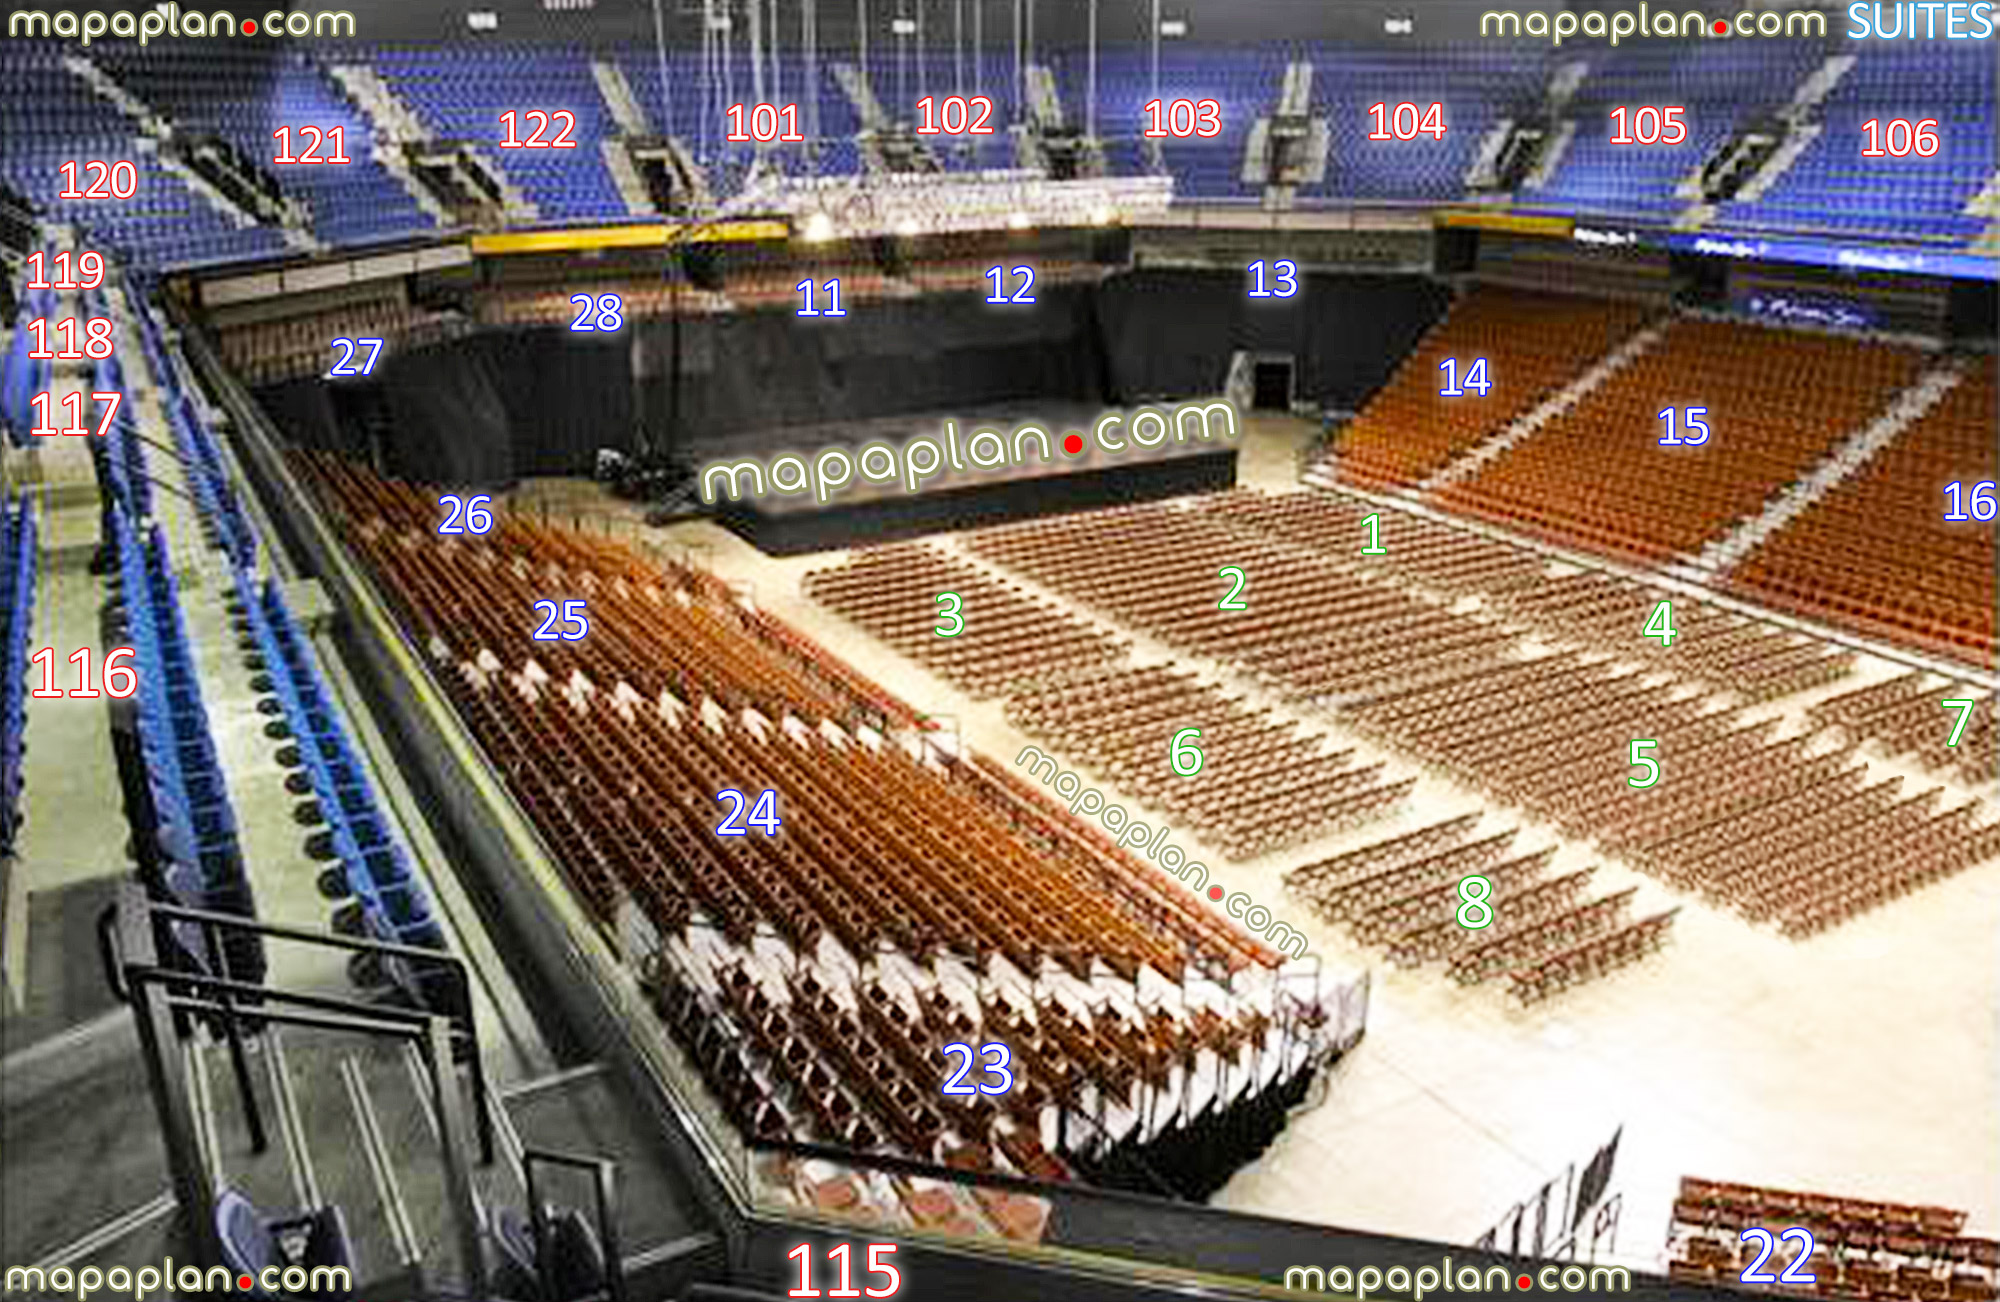 view section 115 row c seat 7 virtual connecticut casino venue 3d interactive inside stage review tour concert interior picture lower upper levels suites Uncasville Mohegan Sun Arena seating chart